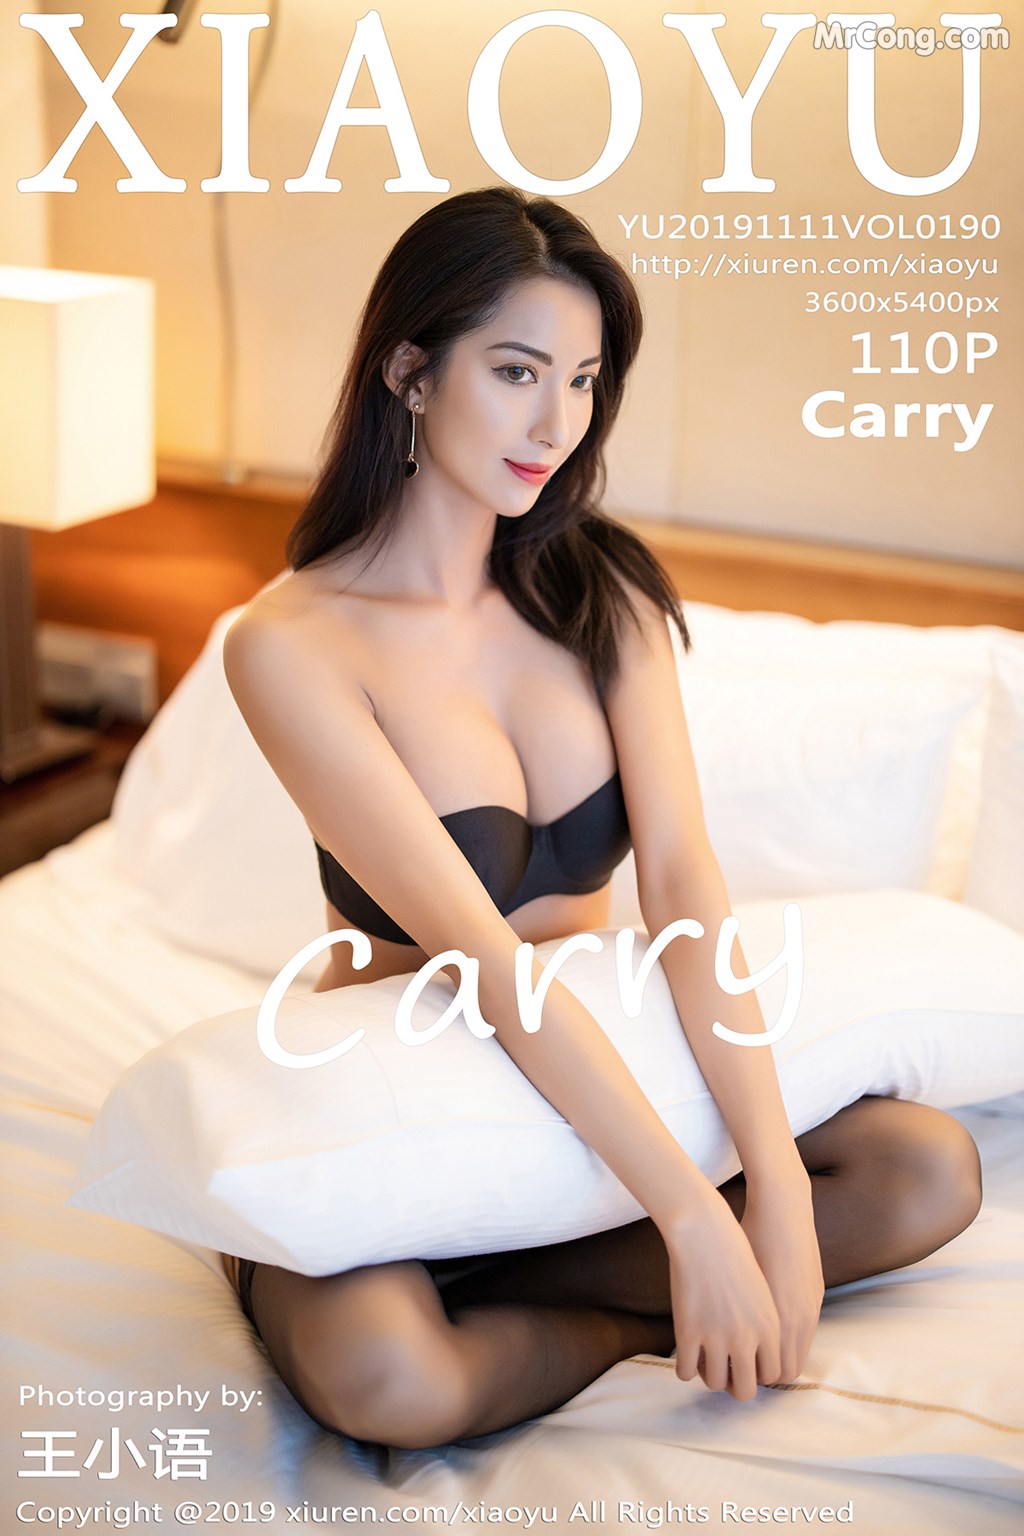 XiaoYu Vol.190: Carry (111 pictures)